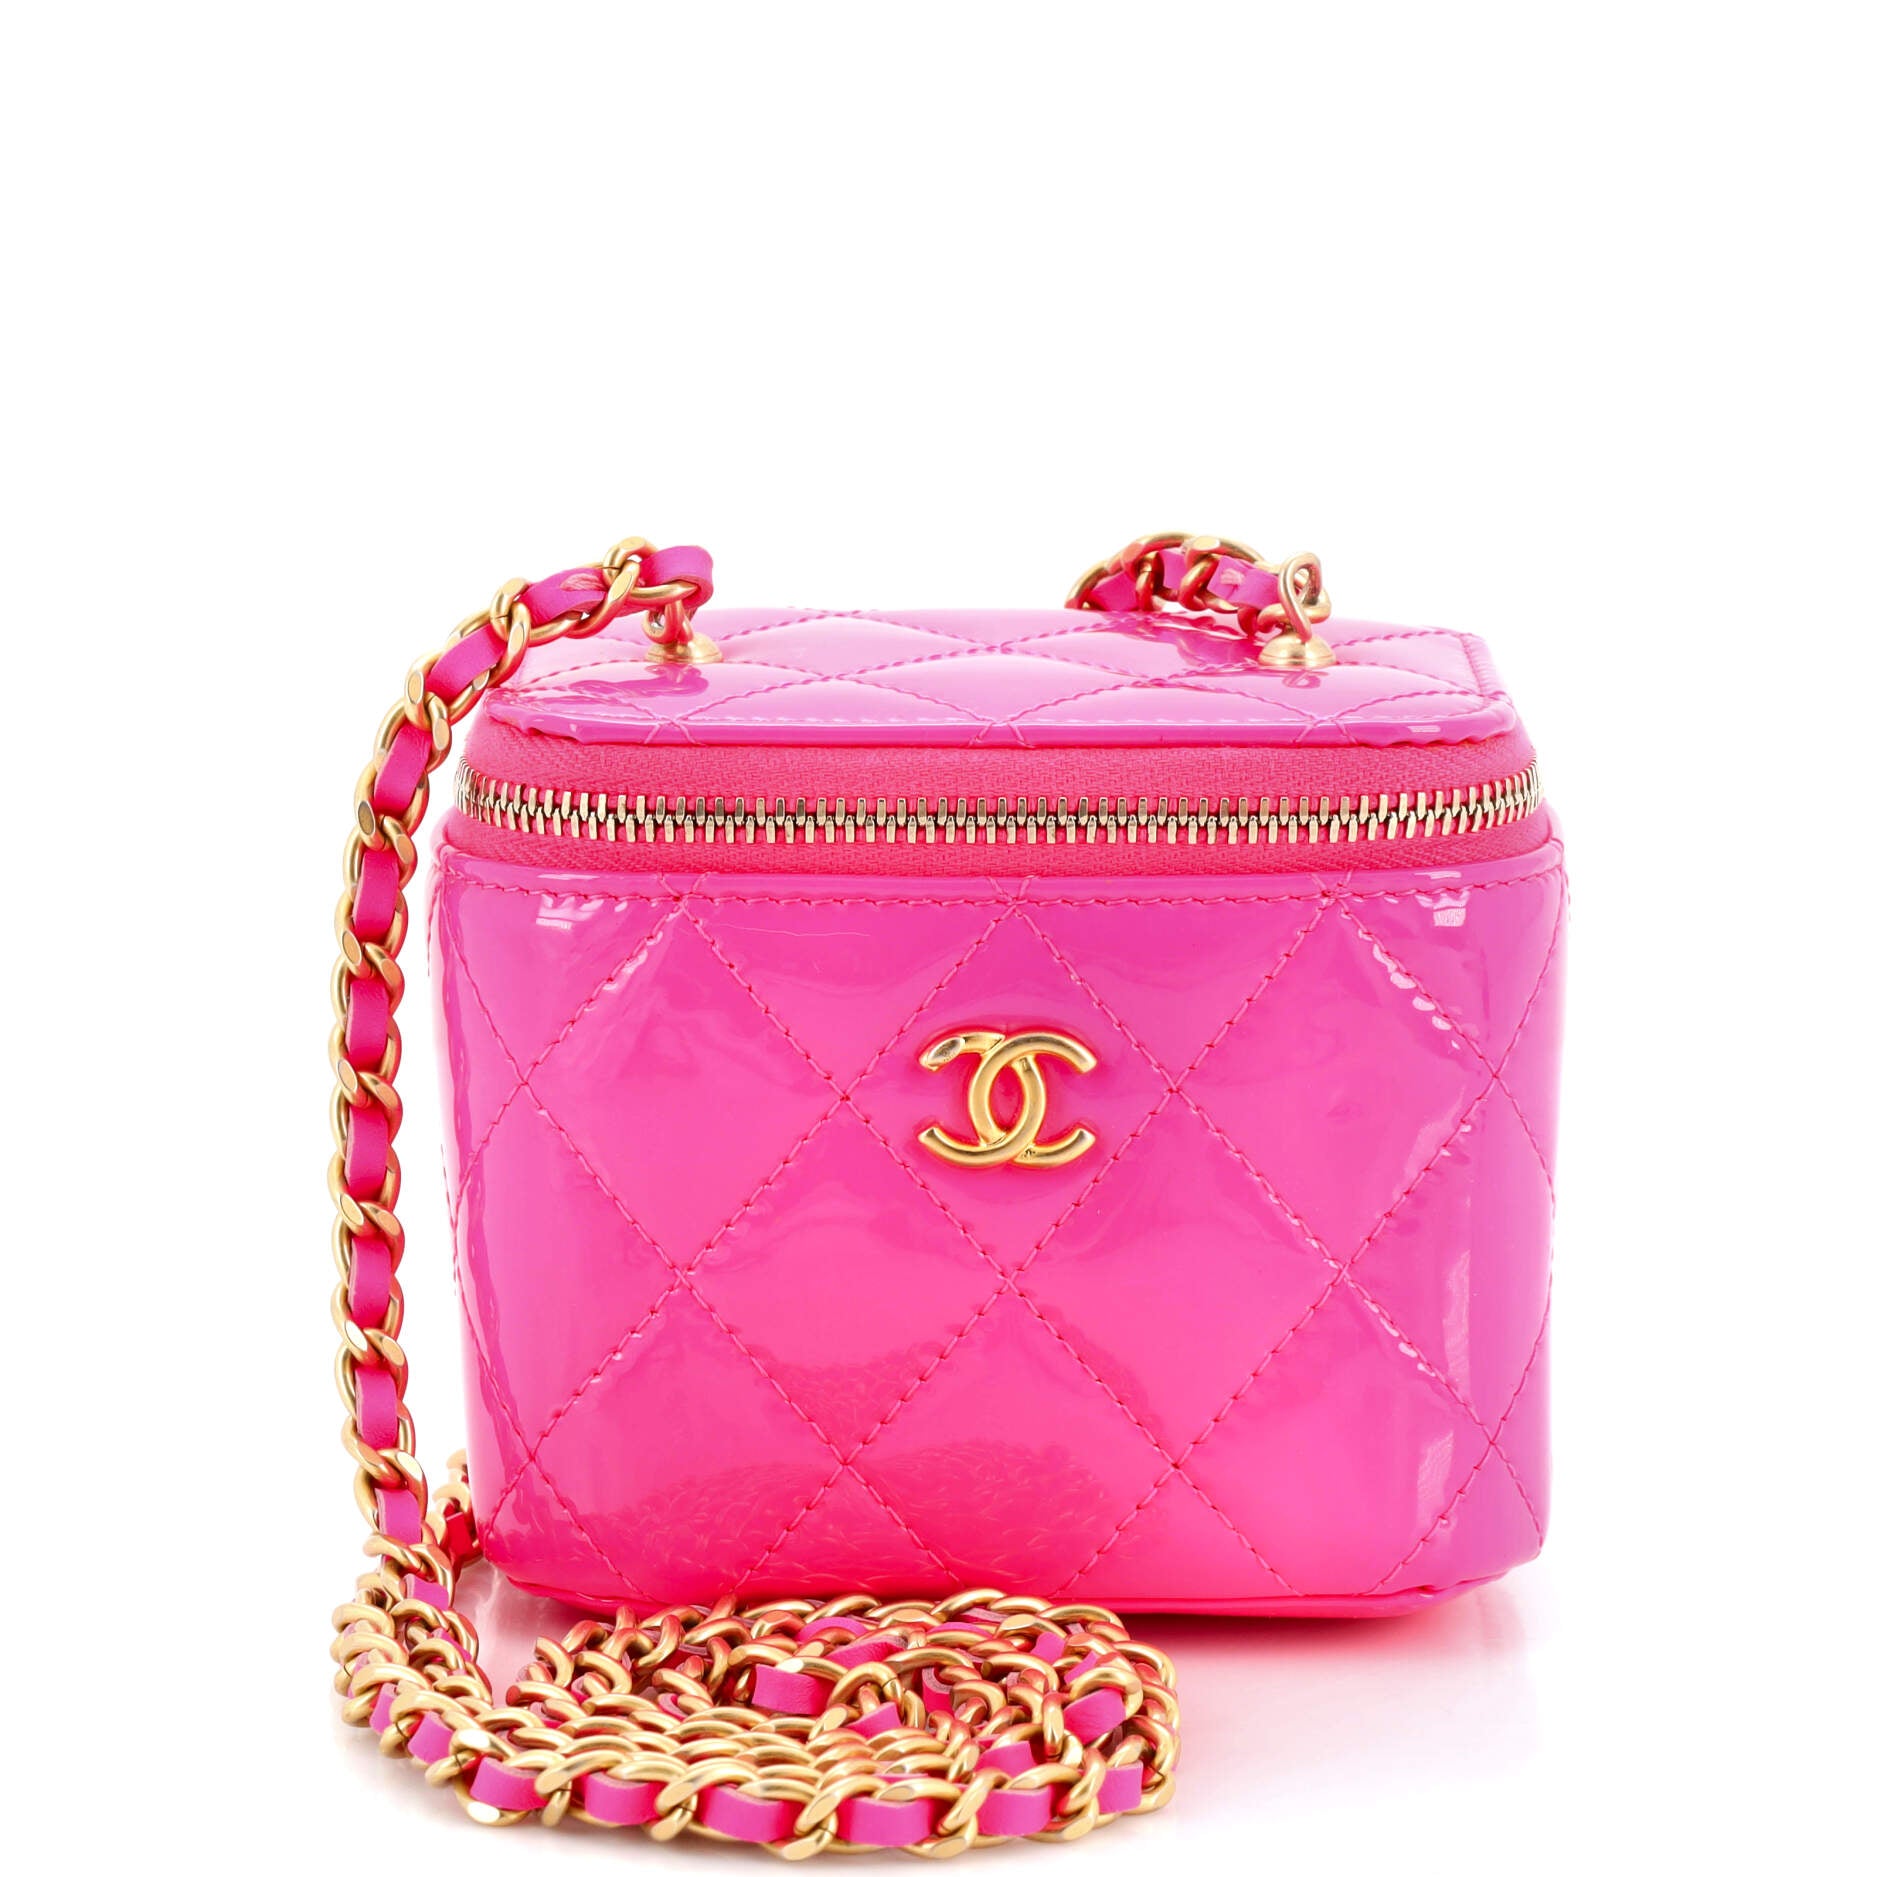 Pearl Crush Vanity Case with Chain Quilted Patent Mini